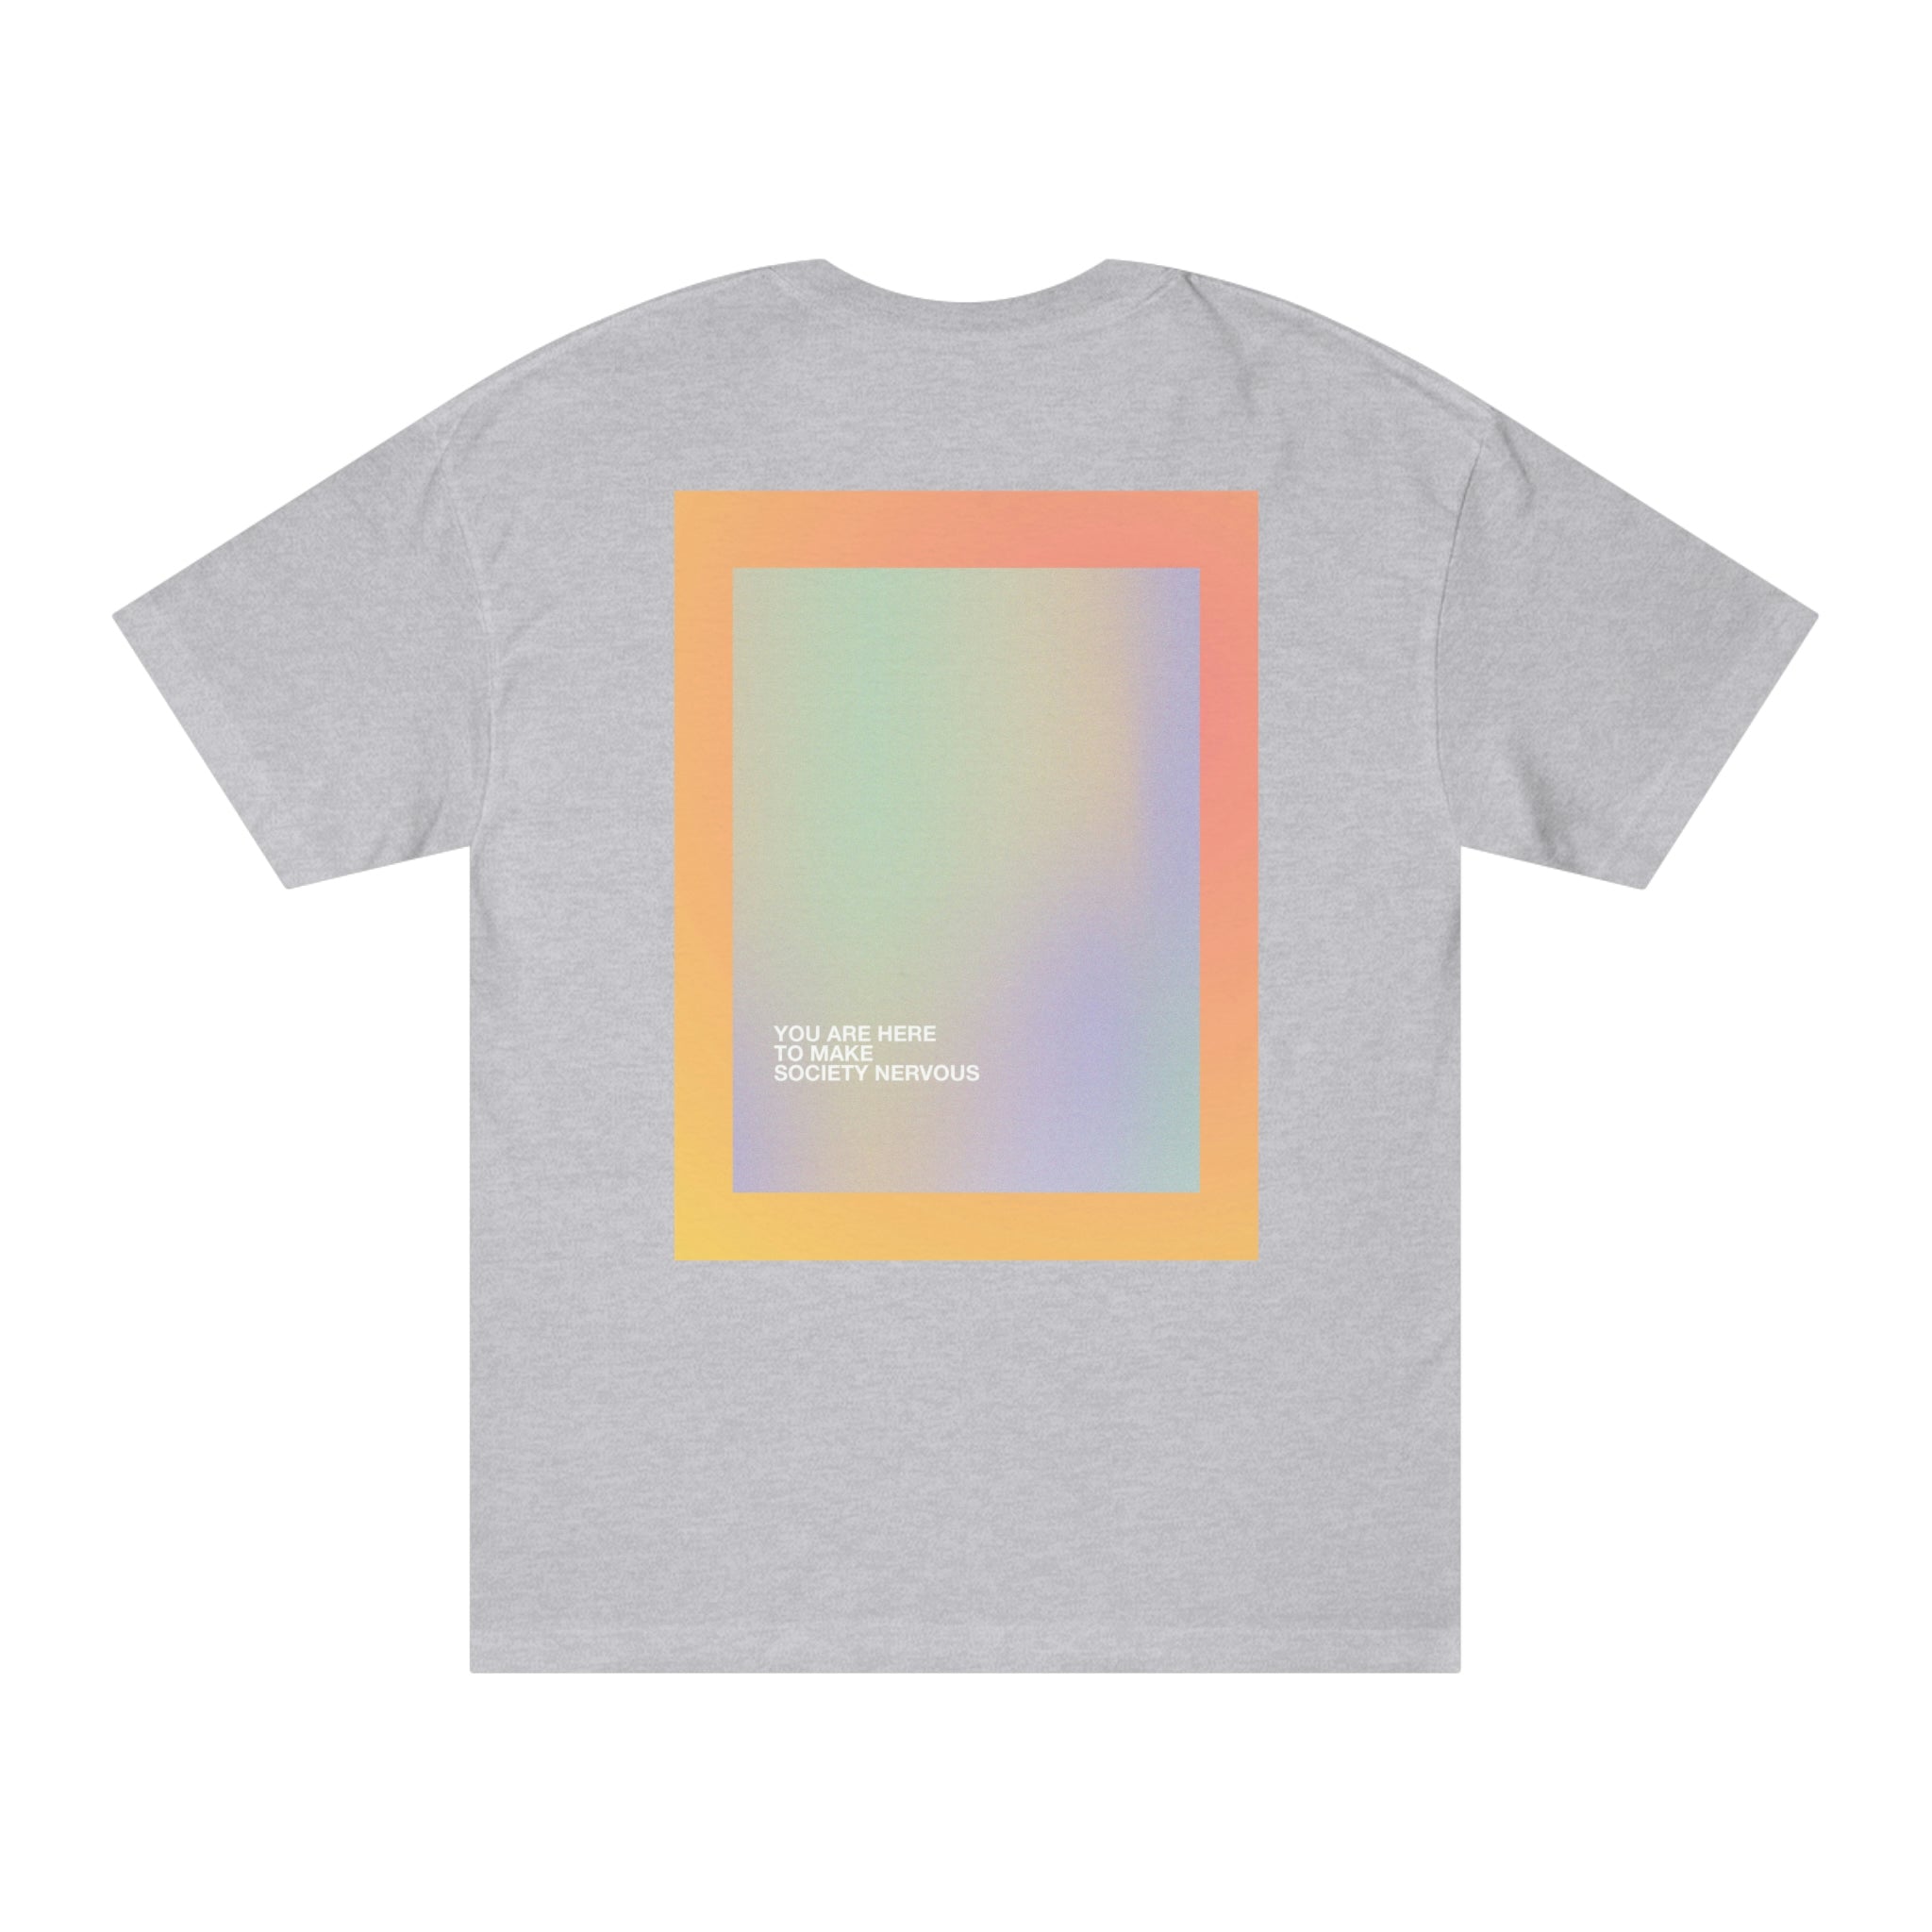 THE "YOU ARE HERE" GRAPHIC TEE